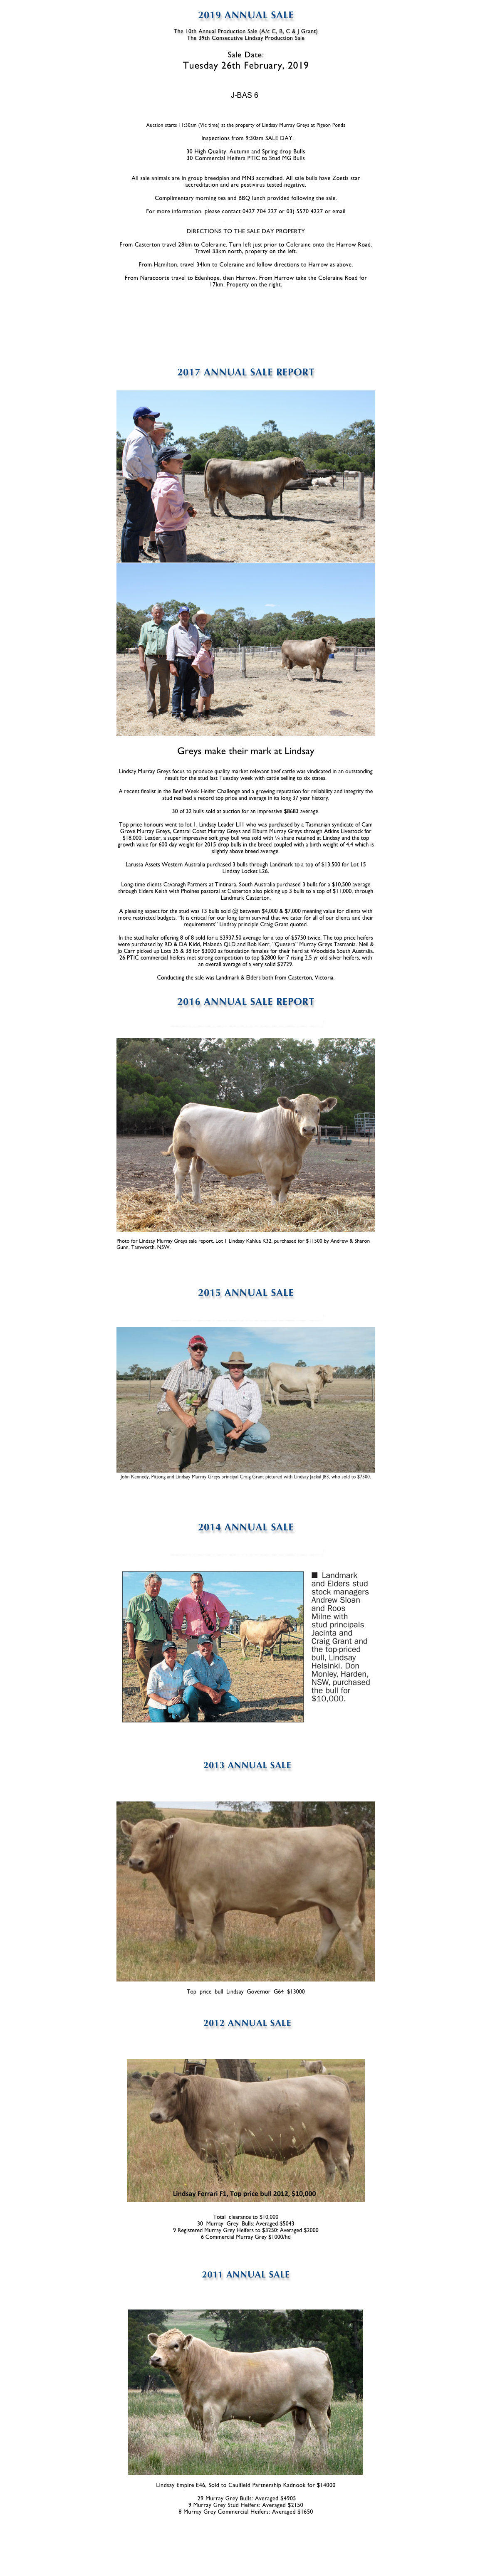 
2019 ANNUAL SALE

The 10th Annual Production Sale (A/c C, B, C & J Grant)
The 39th Consecutive Lindsay Production Sale

Sale Date:	
Tuesday 26th February, 2019


￼



Auction starts 11:30am (Vic time) at the property of Lindsay Murray Greys at Pigeon Ponds 

		Inspections from 9:30am SALE DAY.

30 High Quality, Autumn and Spring drop Bulls 
30 Commercial Heifers PTIC to Stud MG Bulls


All sale animals are in group breedplan and MN3 accredited. All sale bulls have Zoetis star accreditation and are pestivirus tested negative.

Complimentary morning tea and BBQ lunch provided following the sale.

For more information, please contact 0427 704 227 or 03) 5570 4227 or email lindsaymgreys@activ8.net.au

DIRECTIONS TO THE SALE DAY PROPERTY

From Casterton travel 28km to Coleraine. Turn left just prior to Coleraine onto the Harrow Road. Travel 33km north, property on the left.

From Hamilton, travel 34km to Coleraine and follow directions to Harrow as above.

From Naracoorte travel to Edenhope, then Harrow. From Harrow take the Coleraine Road for 17km. Property on the right.

CLICK HERE FOR 2019 CATALOGUE

CLICK HERE FOR UPDATED EBV INFORMATION

CLICK HERE FOR SUPPLEMENTARY SHEET



2017 ANNUAL SALE REPORT

￼
￼

Greys make their mark at Lindsay

Lindsay Murray Greys focus to produce quality market relevant beef cattle was vindicated in an outstanding result for the stud last Tuesday week with cattle selling to six states.

A recent finalist in the Beef Week Heifer Challenge and a growing reputation for reliability and integrity the stud realised a record top price and average in its long 37 year history. 

30 of 32 bulls sold at auction for an impressive $8683 average.

Top price honours went to lot 1, Lindsay Leader L11 who was purchased by a Tasmanian syndicate of Cam Grove Murray Greys, Central Coast Murray Greys and Elburn Murray Greys through Atkins Livestock for $18,000. Leader, a super impressive soft grey bull was sold with ¼ share retained at Lindsay and the top growth value for 600 day weight for 2015 drop bulls in the breed coupled with a birth weight of 4.4 which is slightly above breed average.

Larussa Assets Western Australia purchased 3 bulls through Landmark to a top of $13,500 for Lot 15 Lindsay Locket L26.

Long-time clients Cavanagh Partners at Tintinara, South Australia purchased 3 bulls for a $10,500 average through Elders Keith with Phoines pastoral at Casterton also picking up 3 bulls to a top of $11,000, through Landmark Casterton. 

A pleasing aspect for the stud was 13 bulls sold @ between $4,000 & $7,000 meaning value for clients with more restricted budgets. “It is critical for our long term survival that we cater for all of our clients and their requirements” Lindsay principle Craig Grant quoted.

In the stud heifer offering 8 of 8 sold for a $3937.50 average for a top of $5750 twice. The top price heifers were purchased by RD & DA Kidd, Malanda QLD and Bob Kerr, “Quesera” Murray Greys Tasmania. Neil & Jo Carr picked up Lots 35 & 38 for $3000 as foundation females for their herd at Woodside South Australia. 
26 PTIC commercial heifers met strong competition to top $2800 for 7 rising 2.5 yr old silver heifers, with an overall average of a very solid $2729. 

Conducting the sale was Landmark & Elders both from Casterton, Victoria.

  
2016 ANNUAL SALE REPORT

CLICK HERE FOR 2016 ANNUAL SALE REPORT

￼

Photo for Lindsay Murray Greys sale report, Lot 1 Lindsay Kahlua K32, purchased for $11500 by Andrew & Sharon Gunn, Tamworth, NSW.




2015 ANNUAL SALE

CLICK HERE FOR 2015 ANNUAL SALE REPORT

￼
John Kennedy, Pittong and Lindsay Murray Greys principal Craig Grant pictured with Lindsay Jackal J83, who sold to $7500. 


SEE THE STOCK & LAND ARTICLE HERE


2014 ANNUAL SALE

CLICK HERE FOR 2014 ANNUAL SALE REPORT

￼

SEE THE STOCK AND LAND ARTICLE HERE


 2013 ANNUAL SALE

CLICK HERE FOR 2013 SALE REPORT

￼

Top  price  bull  Lindsay  Governor  G64  $13000


 2012 ANNUAL SALE

CLICK HERE FOR 2012 SALE REPORT

￼

Total  clearance to $10,000   
30  Murray  Grey  Bulls: Averaged $5043   
9 Registered Murray Grey Heifers to $3250: Averaged $2000   
6 Commercial Murray Grey $1000/hd 



2011 ANNUAL SALE


CLICK HERE FOR 2011 SALE REPORT

￼

Lindsay Empire E46, Sold to Caulfield Partnership Kadnook for $14000

 29 Murray Grey Bulls: Averaged $4905
9 Murray Grey Stud Heifers: Averaged $2150
8 Murray Grey Commercial Heifers: Averaged $1650